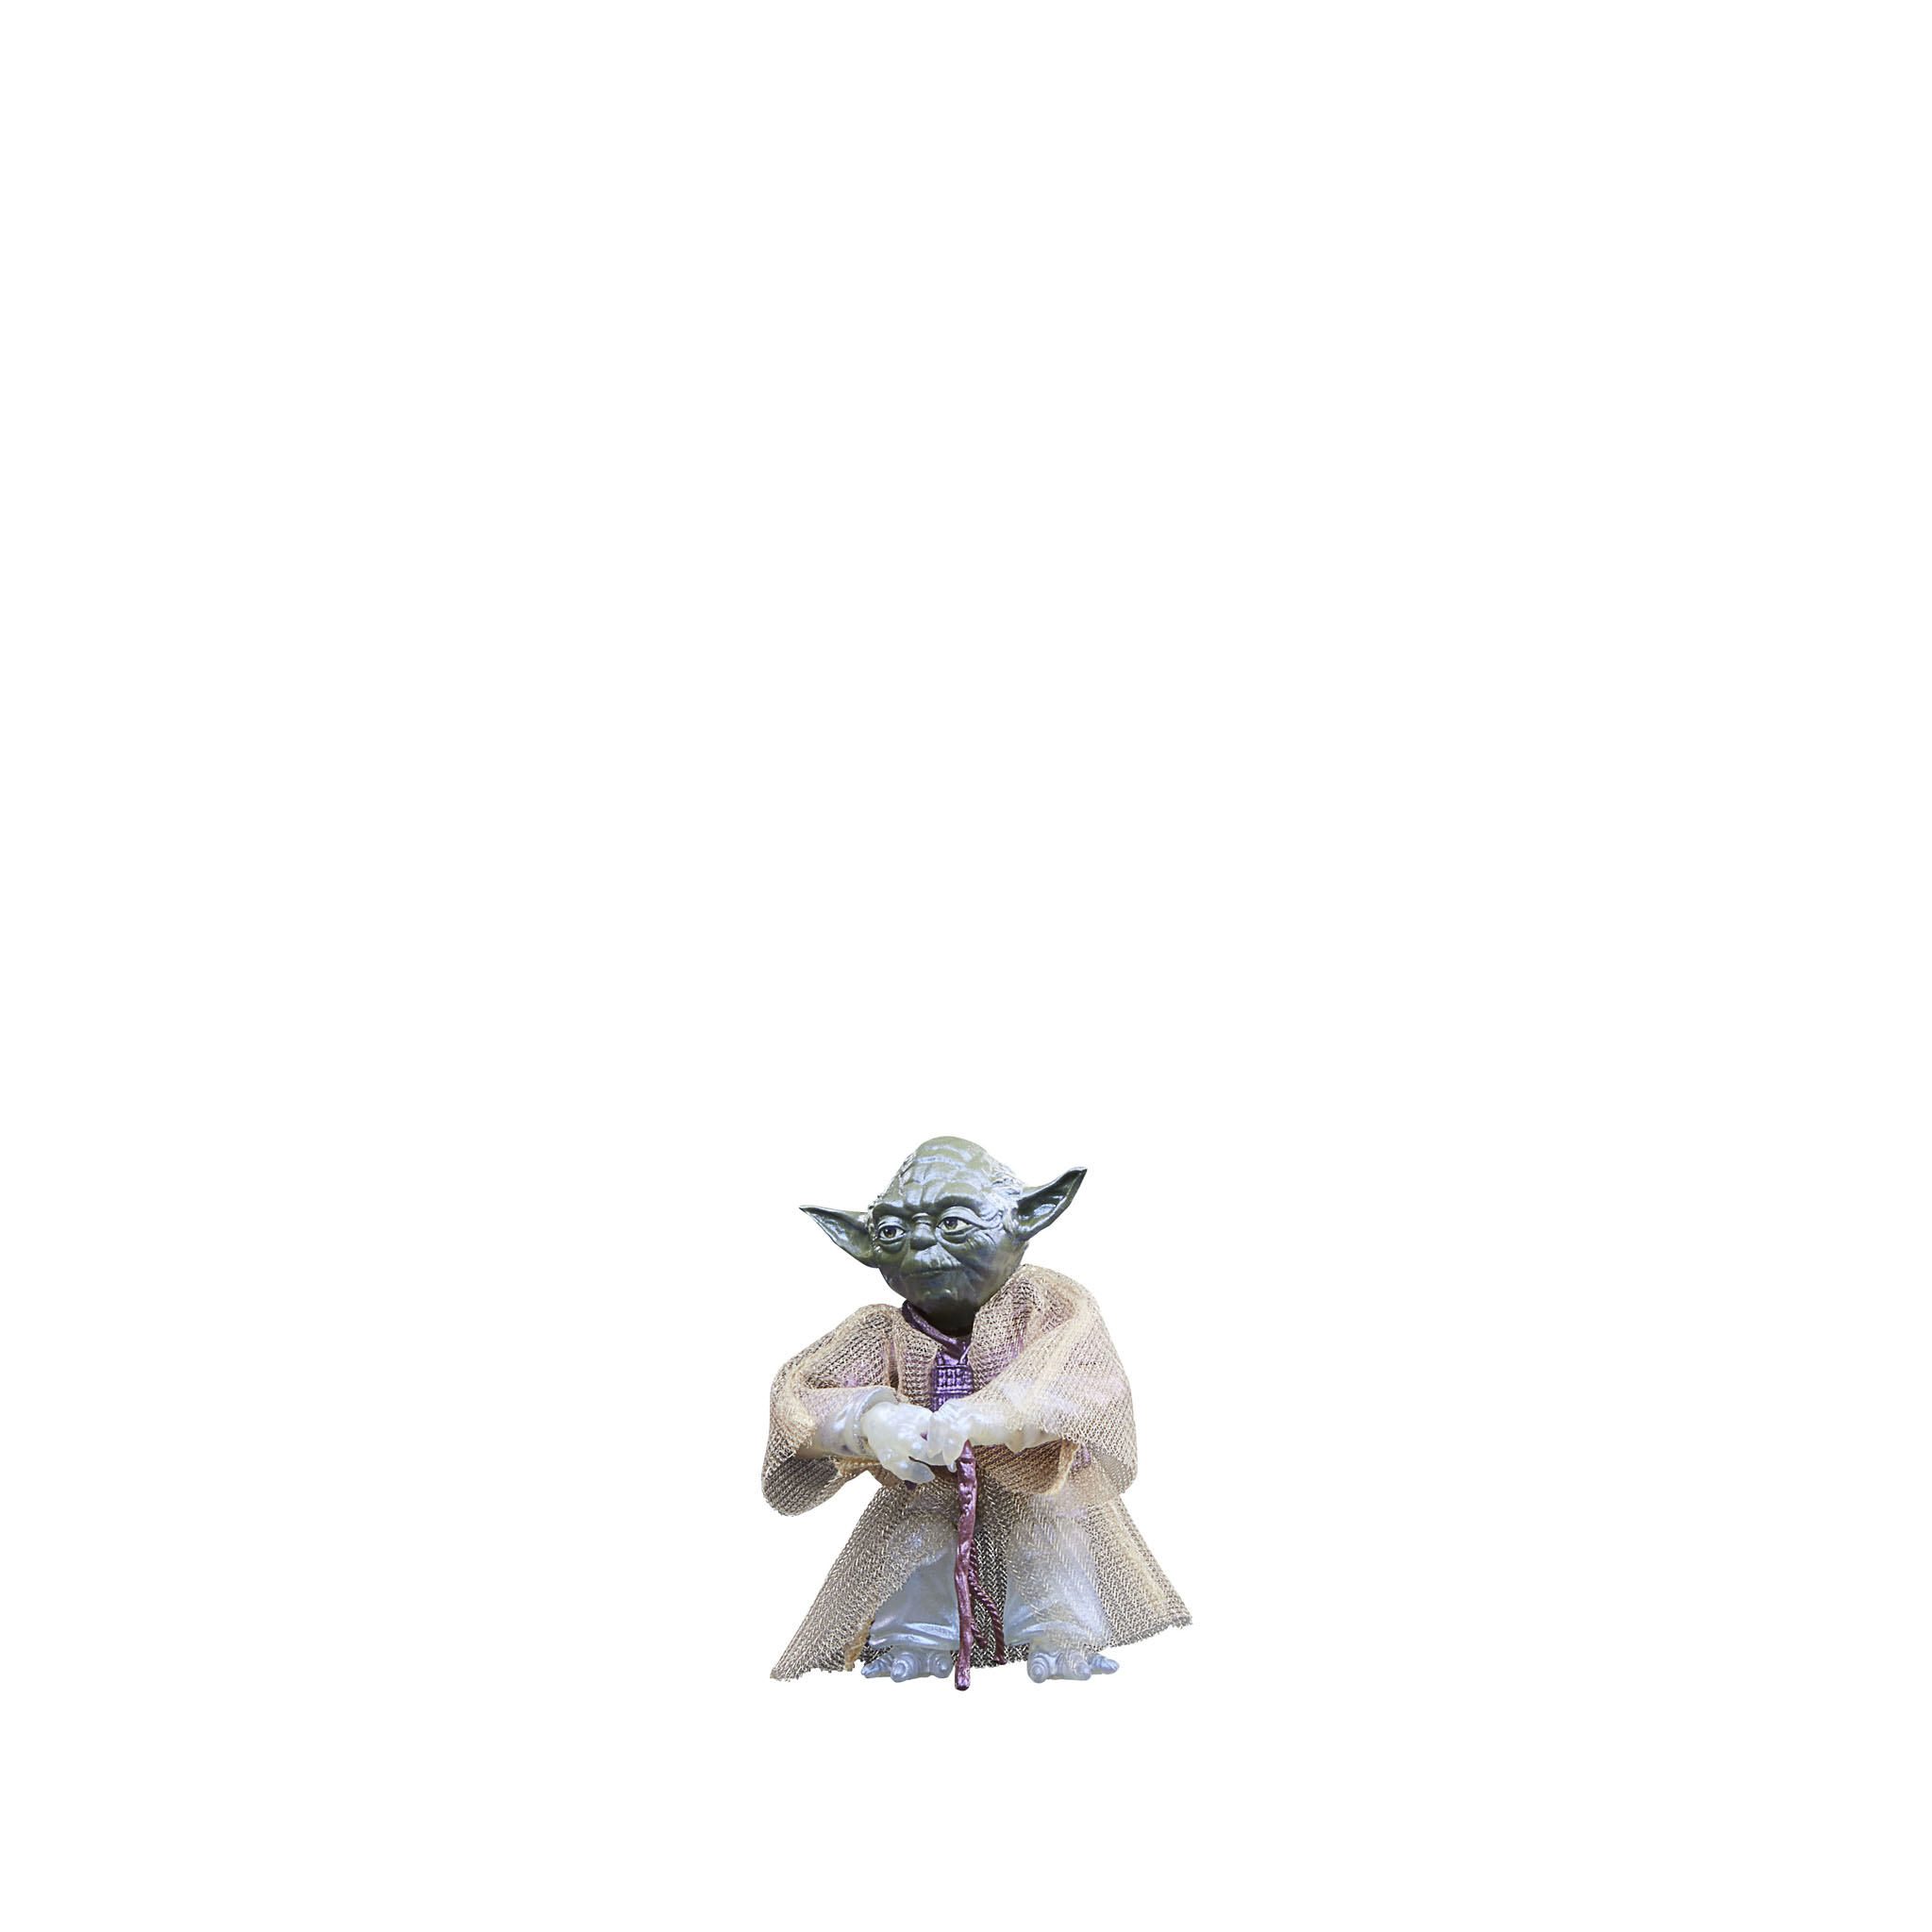 Black Series Yoda Force Spirit 2 Action Fig Brian's Toys